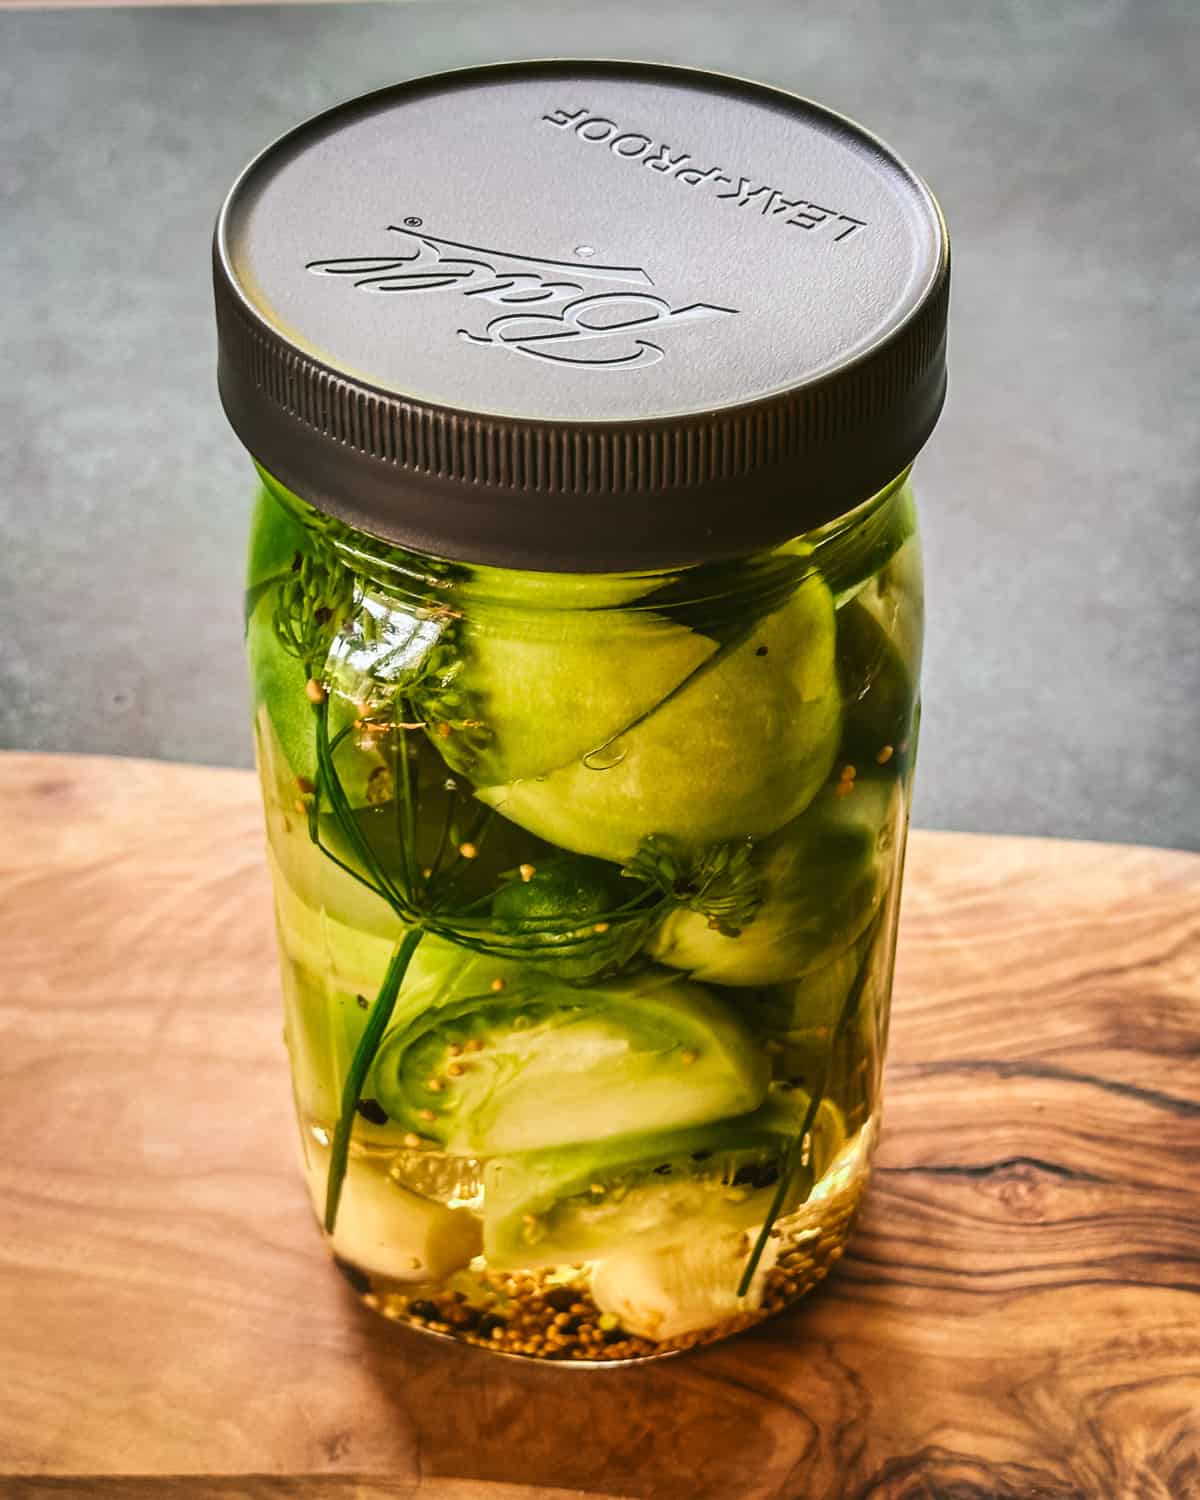 Refrigerated Pickled Green Tomatoes